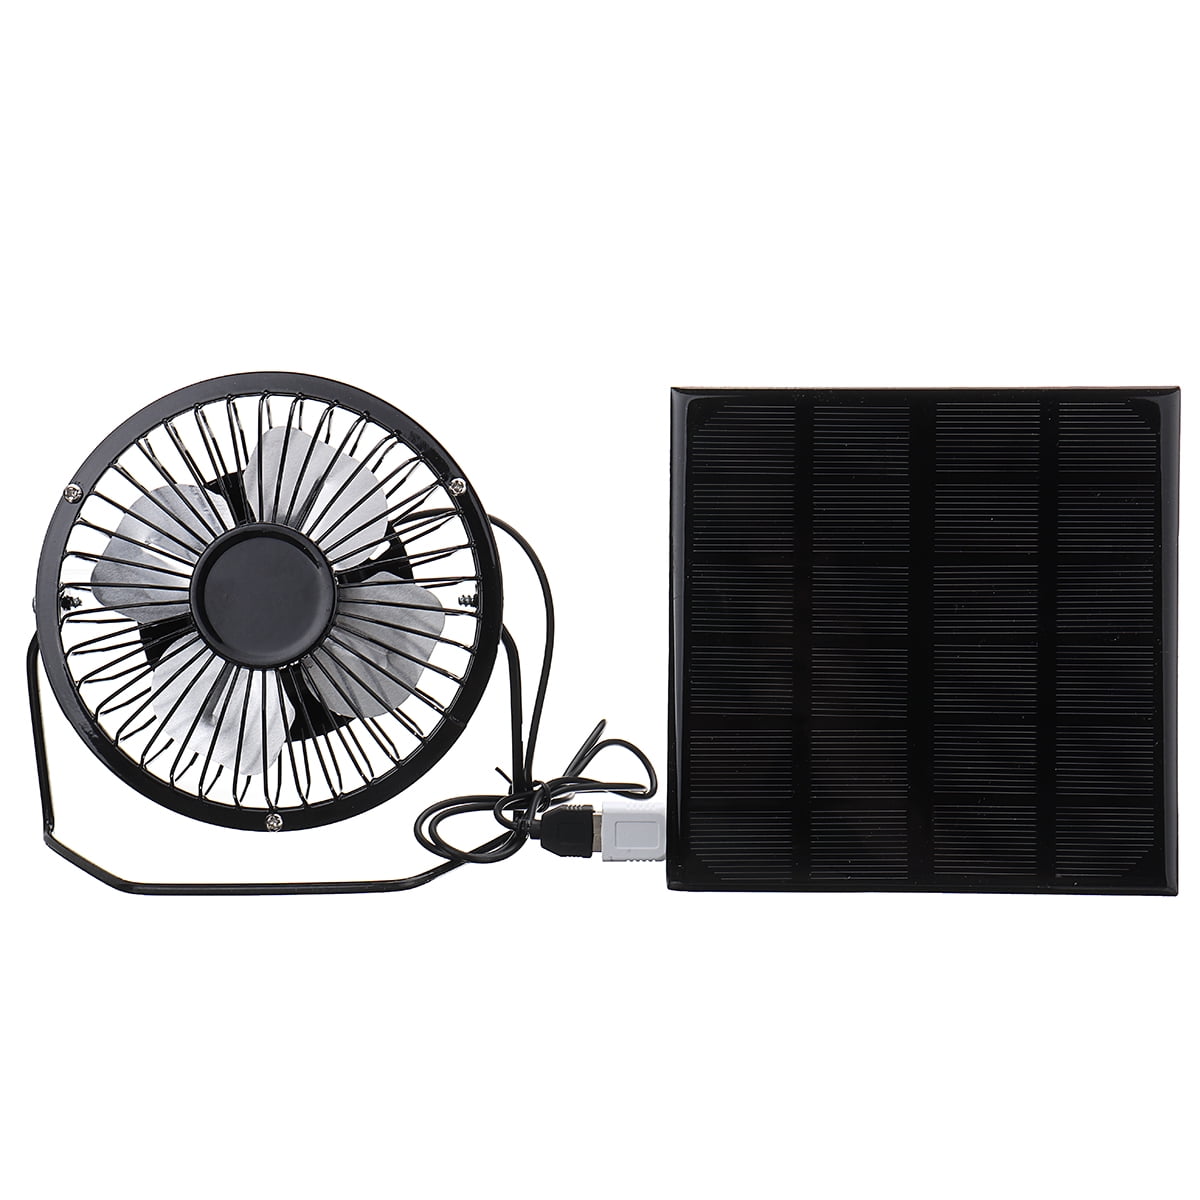 5W Solar Panel USB Fan Outdoor Camping Dog Cat Chicken House Cooling 